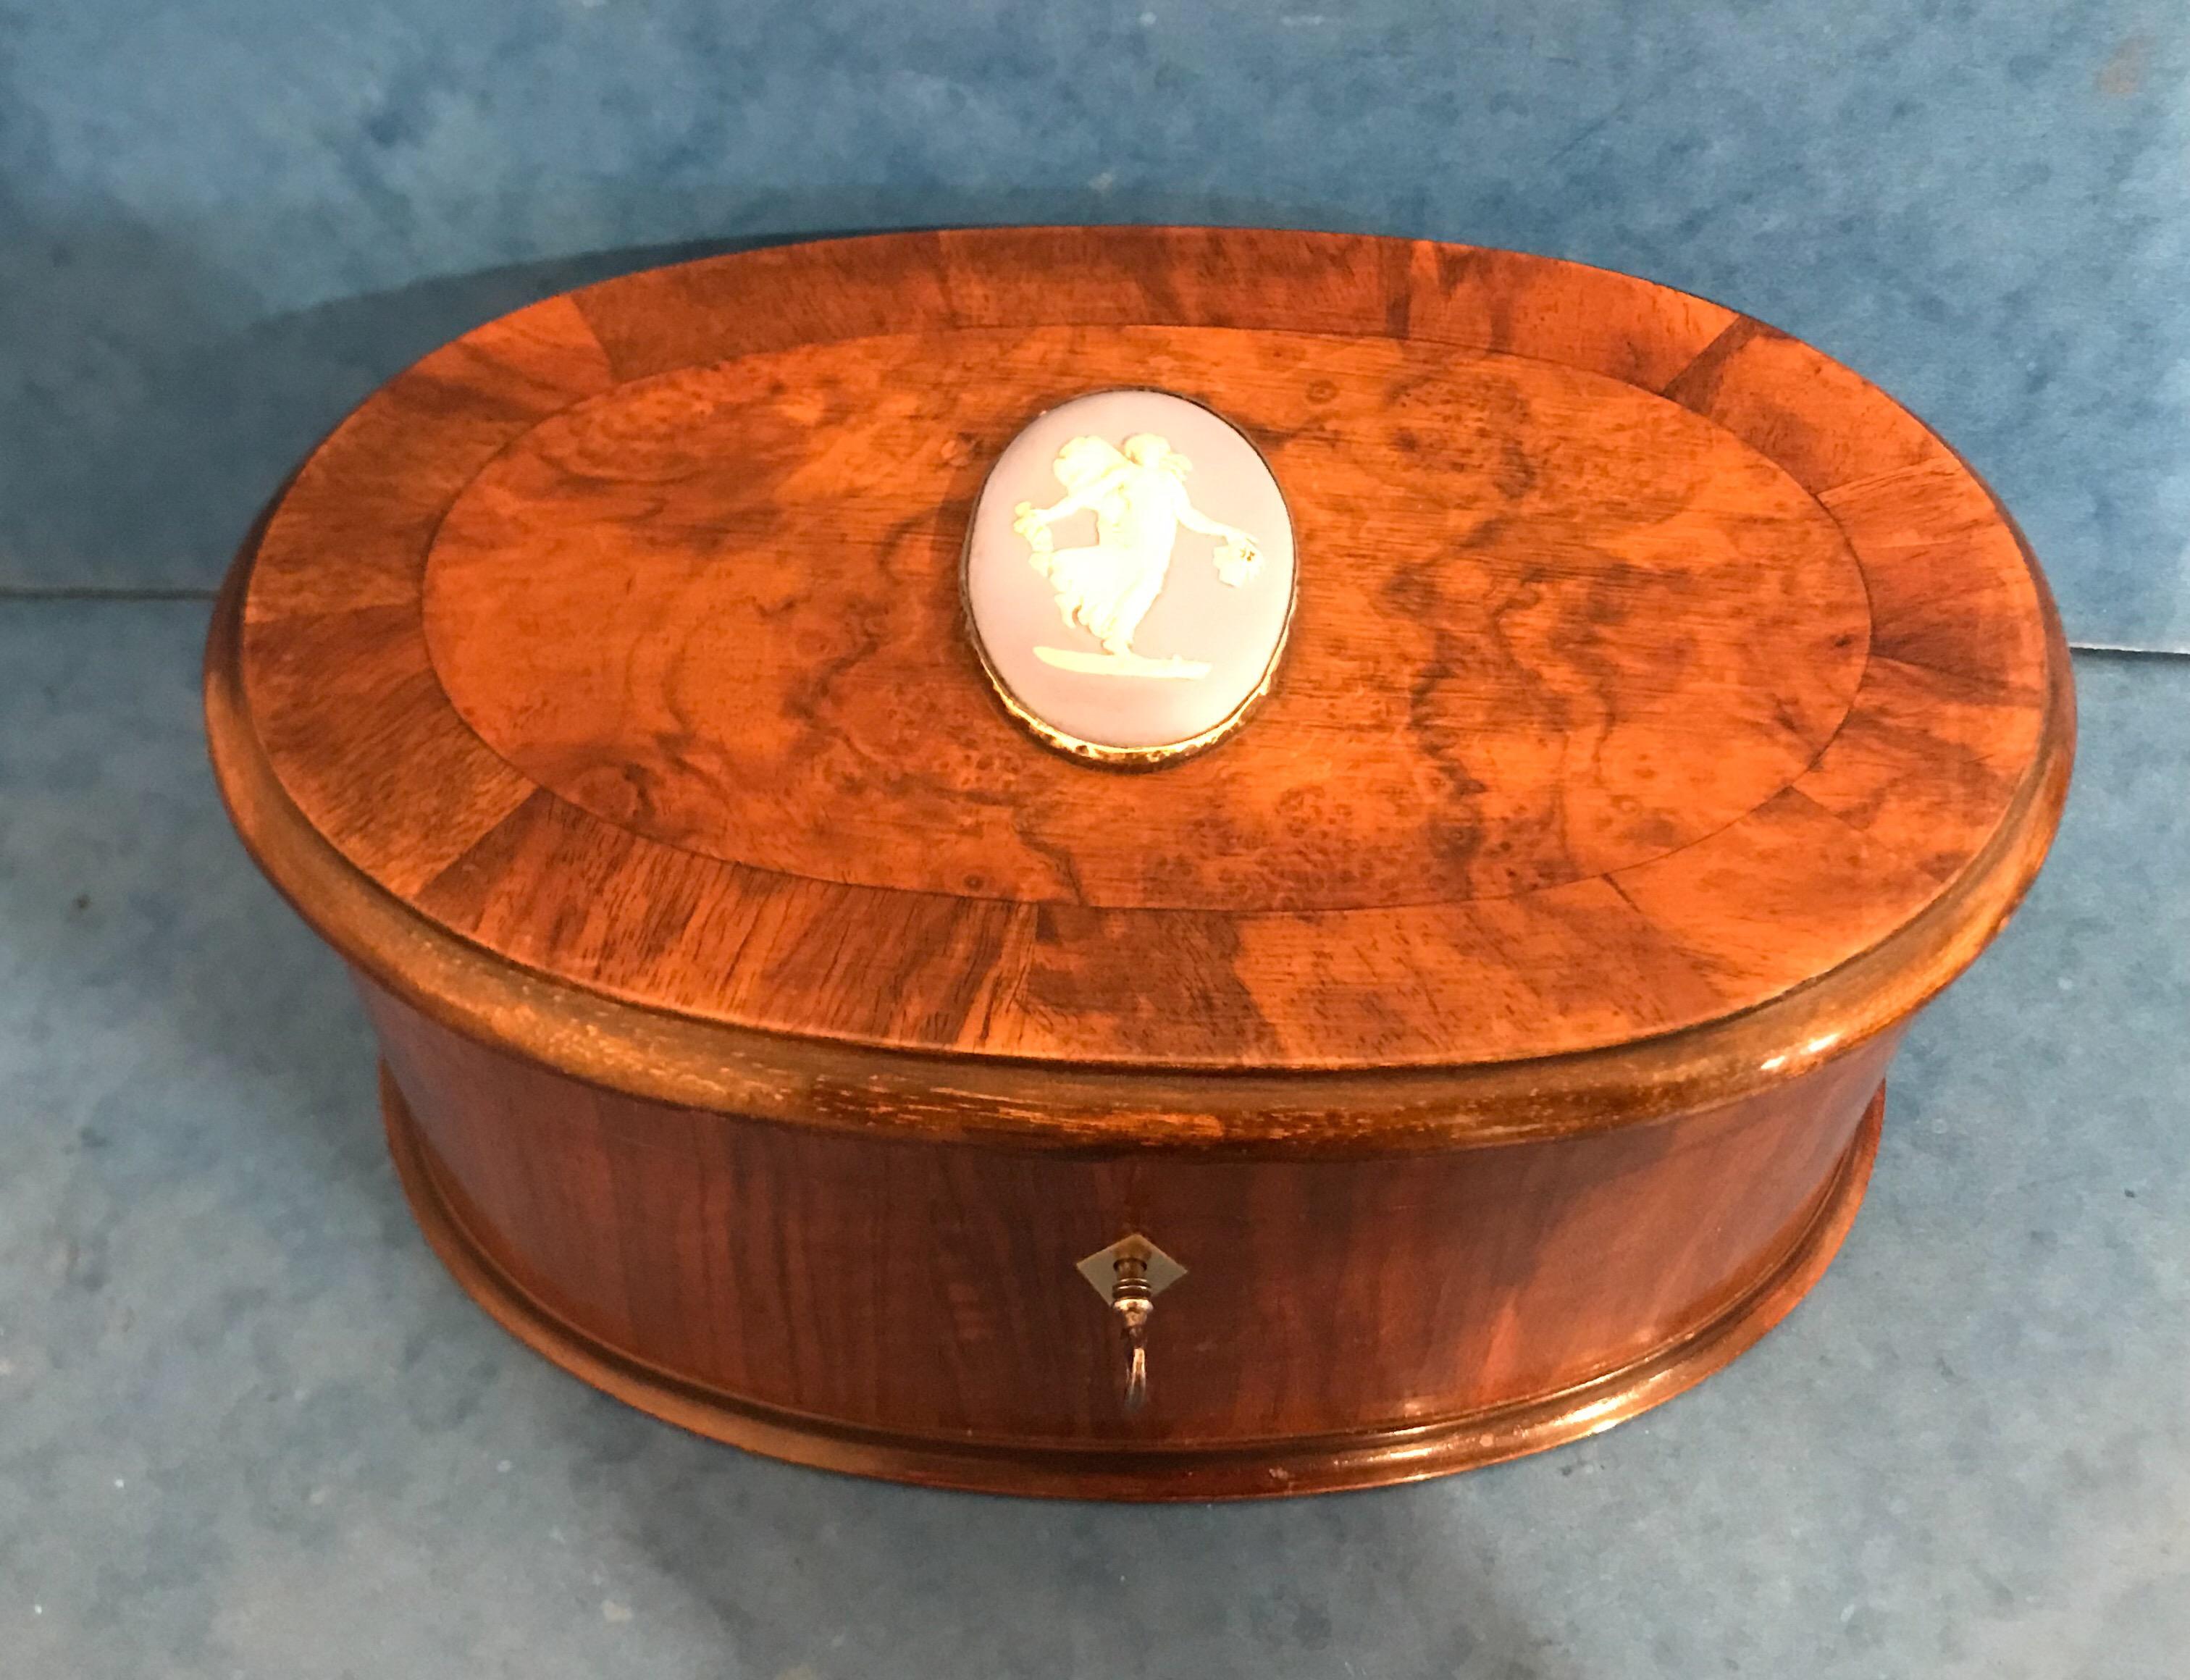 This is a beautiful late Victorian 1900, crossbanded walnut oval box, it has a wedge wood mounted lid, it has it’s original blue velvet interior and a working lock and key. It measures 24 by 15.5 and stands 11cm high, it’s a stunning box.